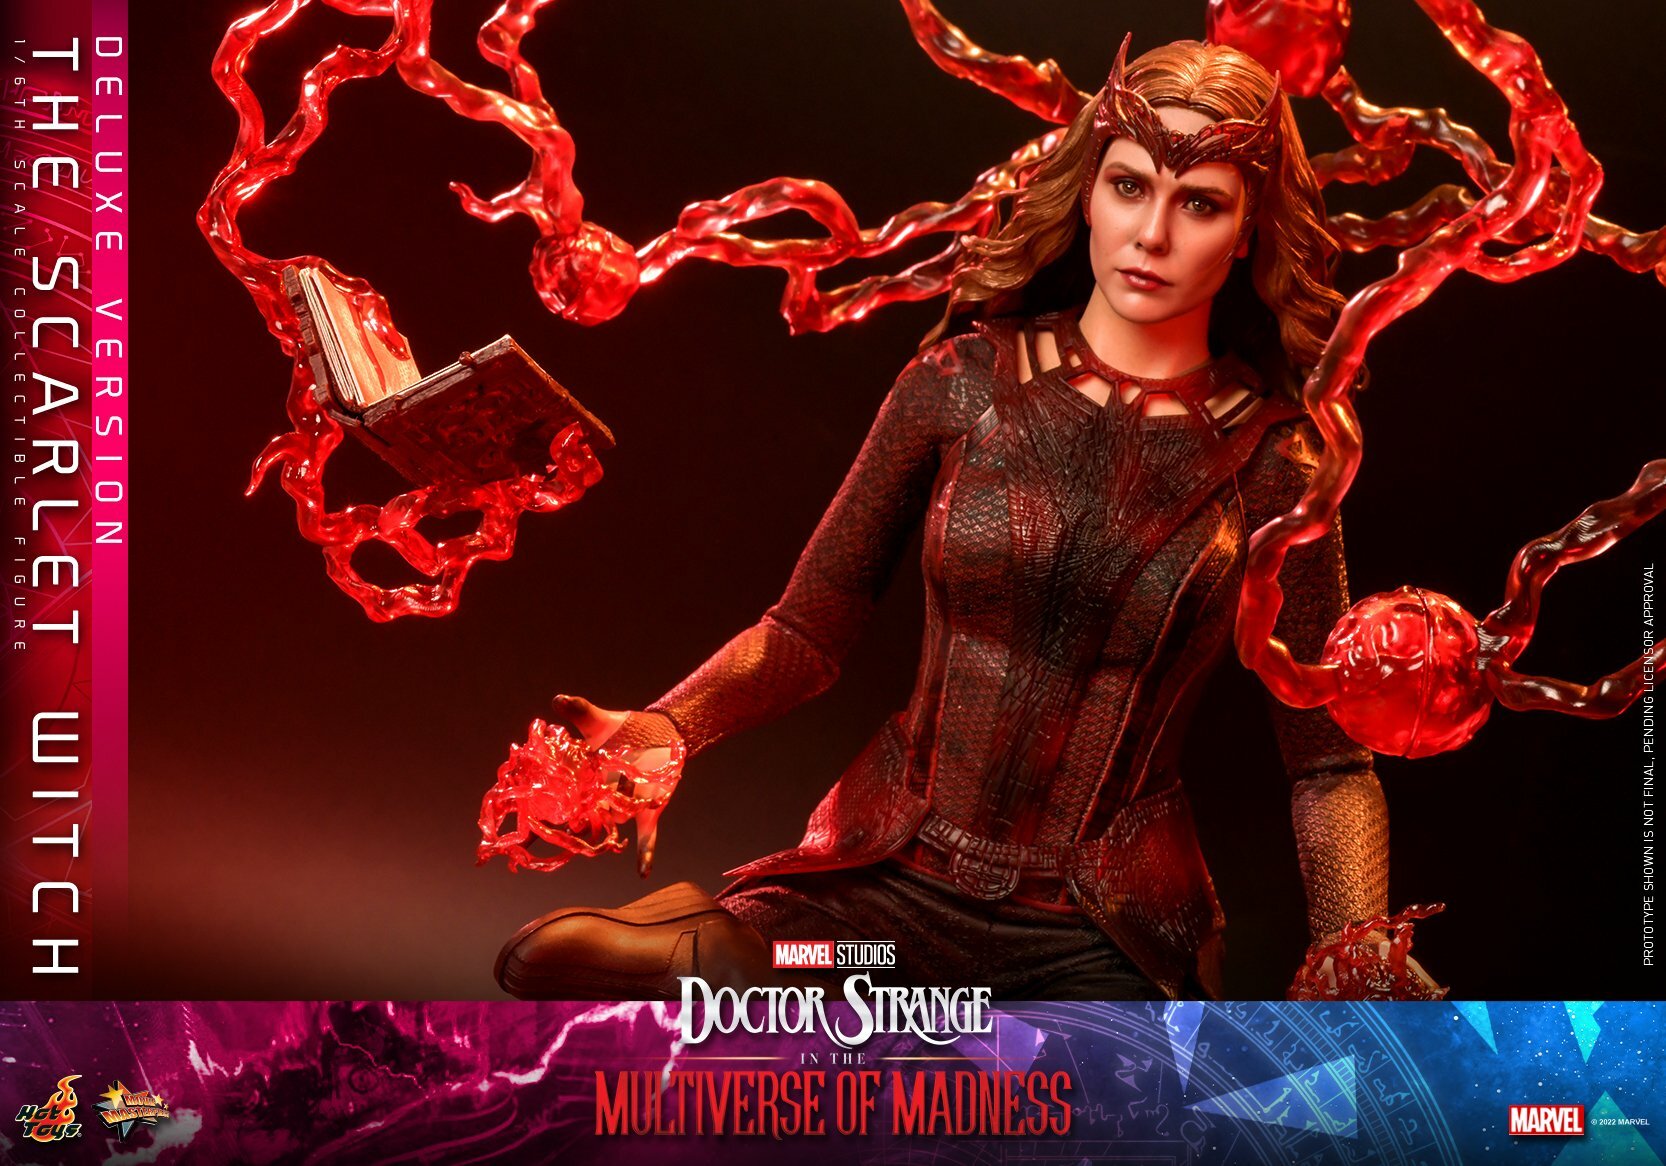 Hot-Toy-Multiverse-of-Madness-Scarlet-Witch-DX-002.jpg.cd76b6fe61cf2210e3298d5af339fa45.jpg